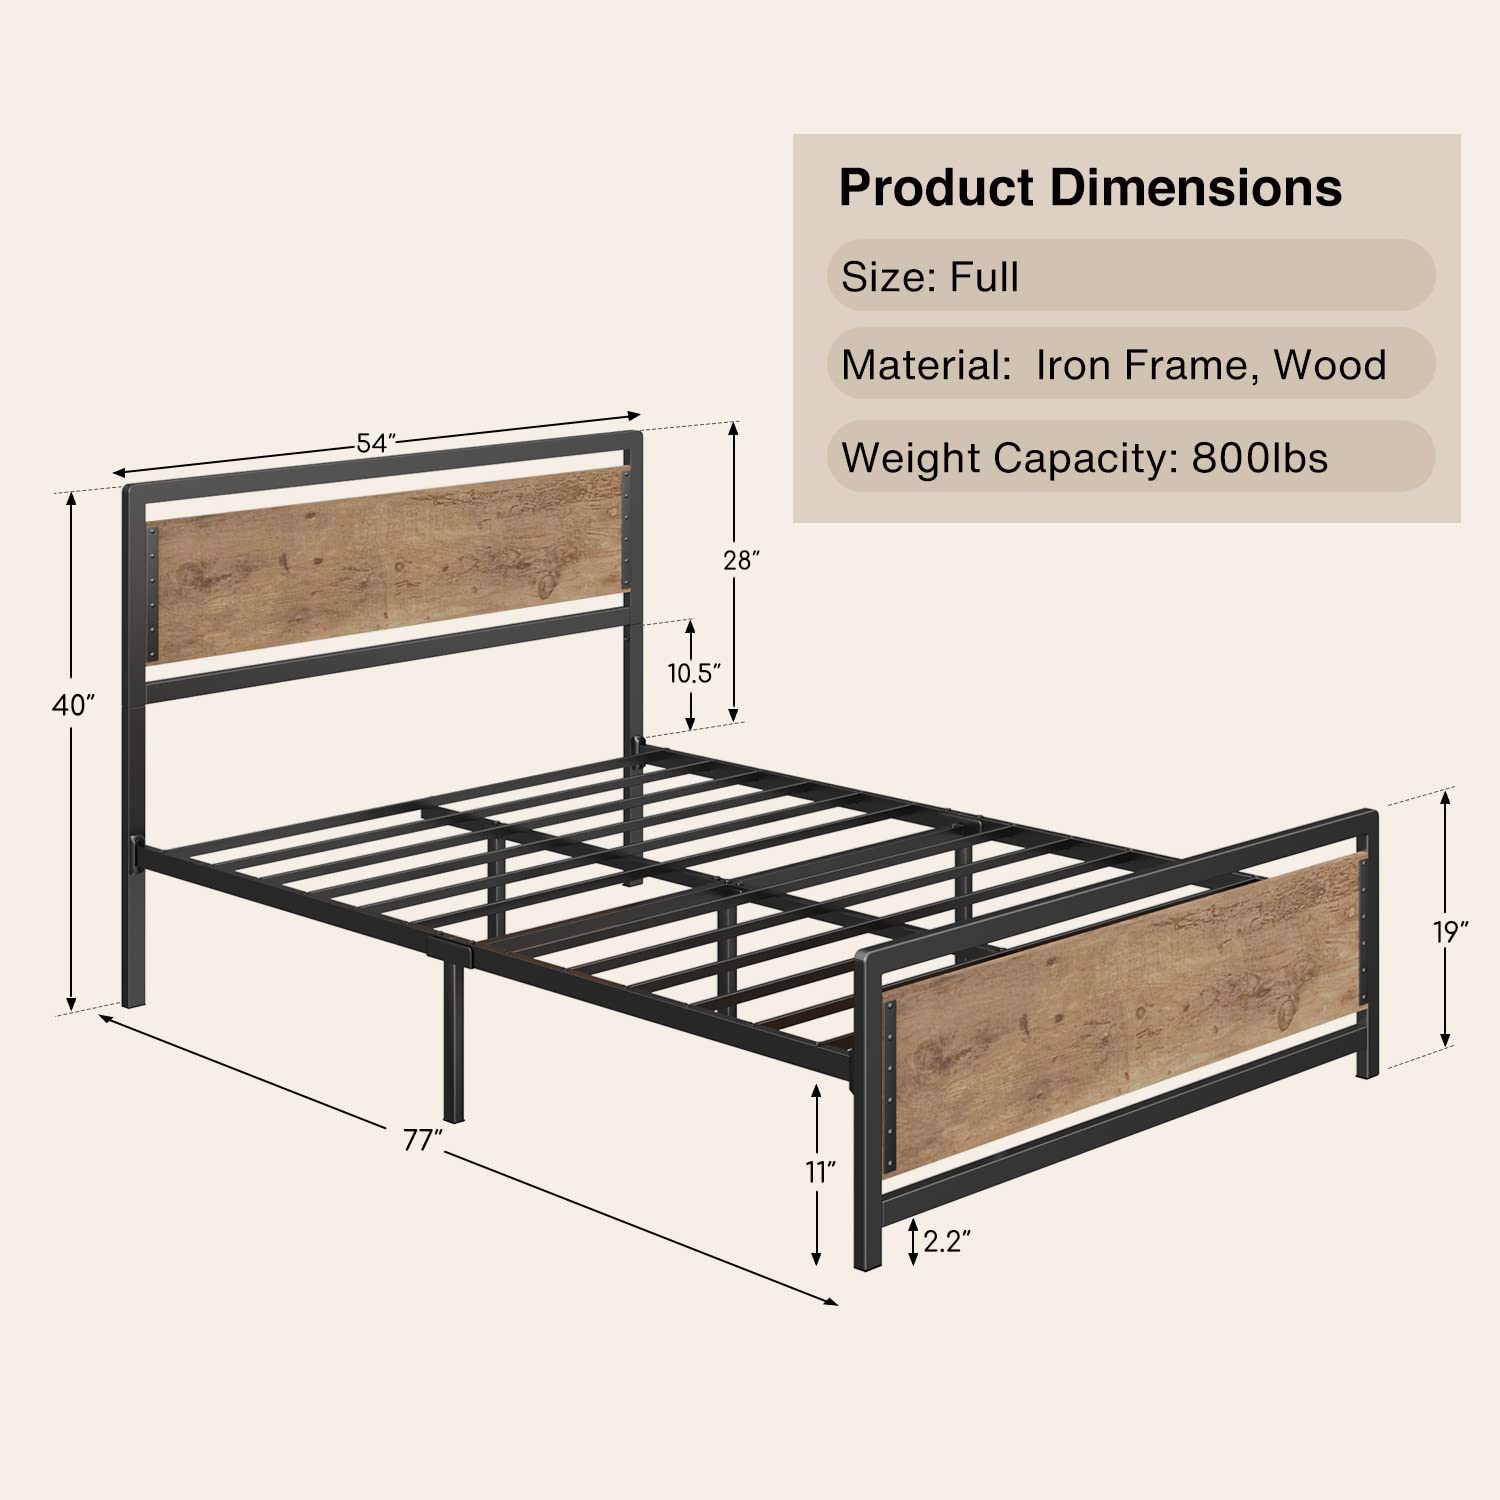 Gizoon BF32 Metal Platform Bed Frame with Wooden Headboard & Large Underbed Storage